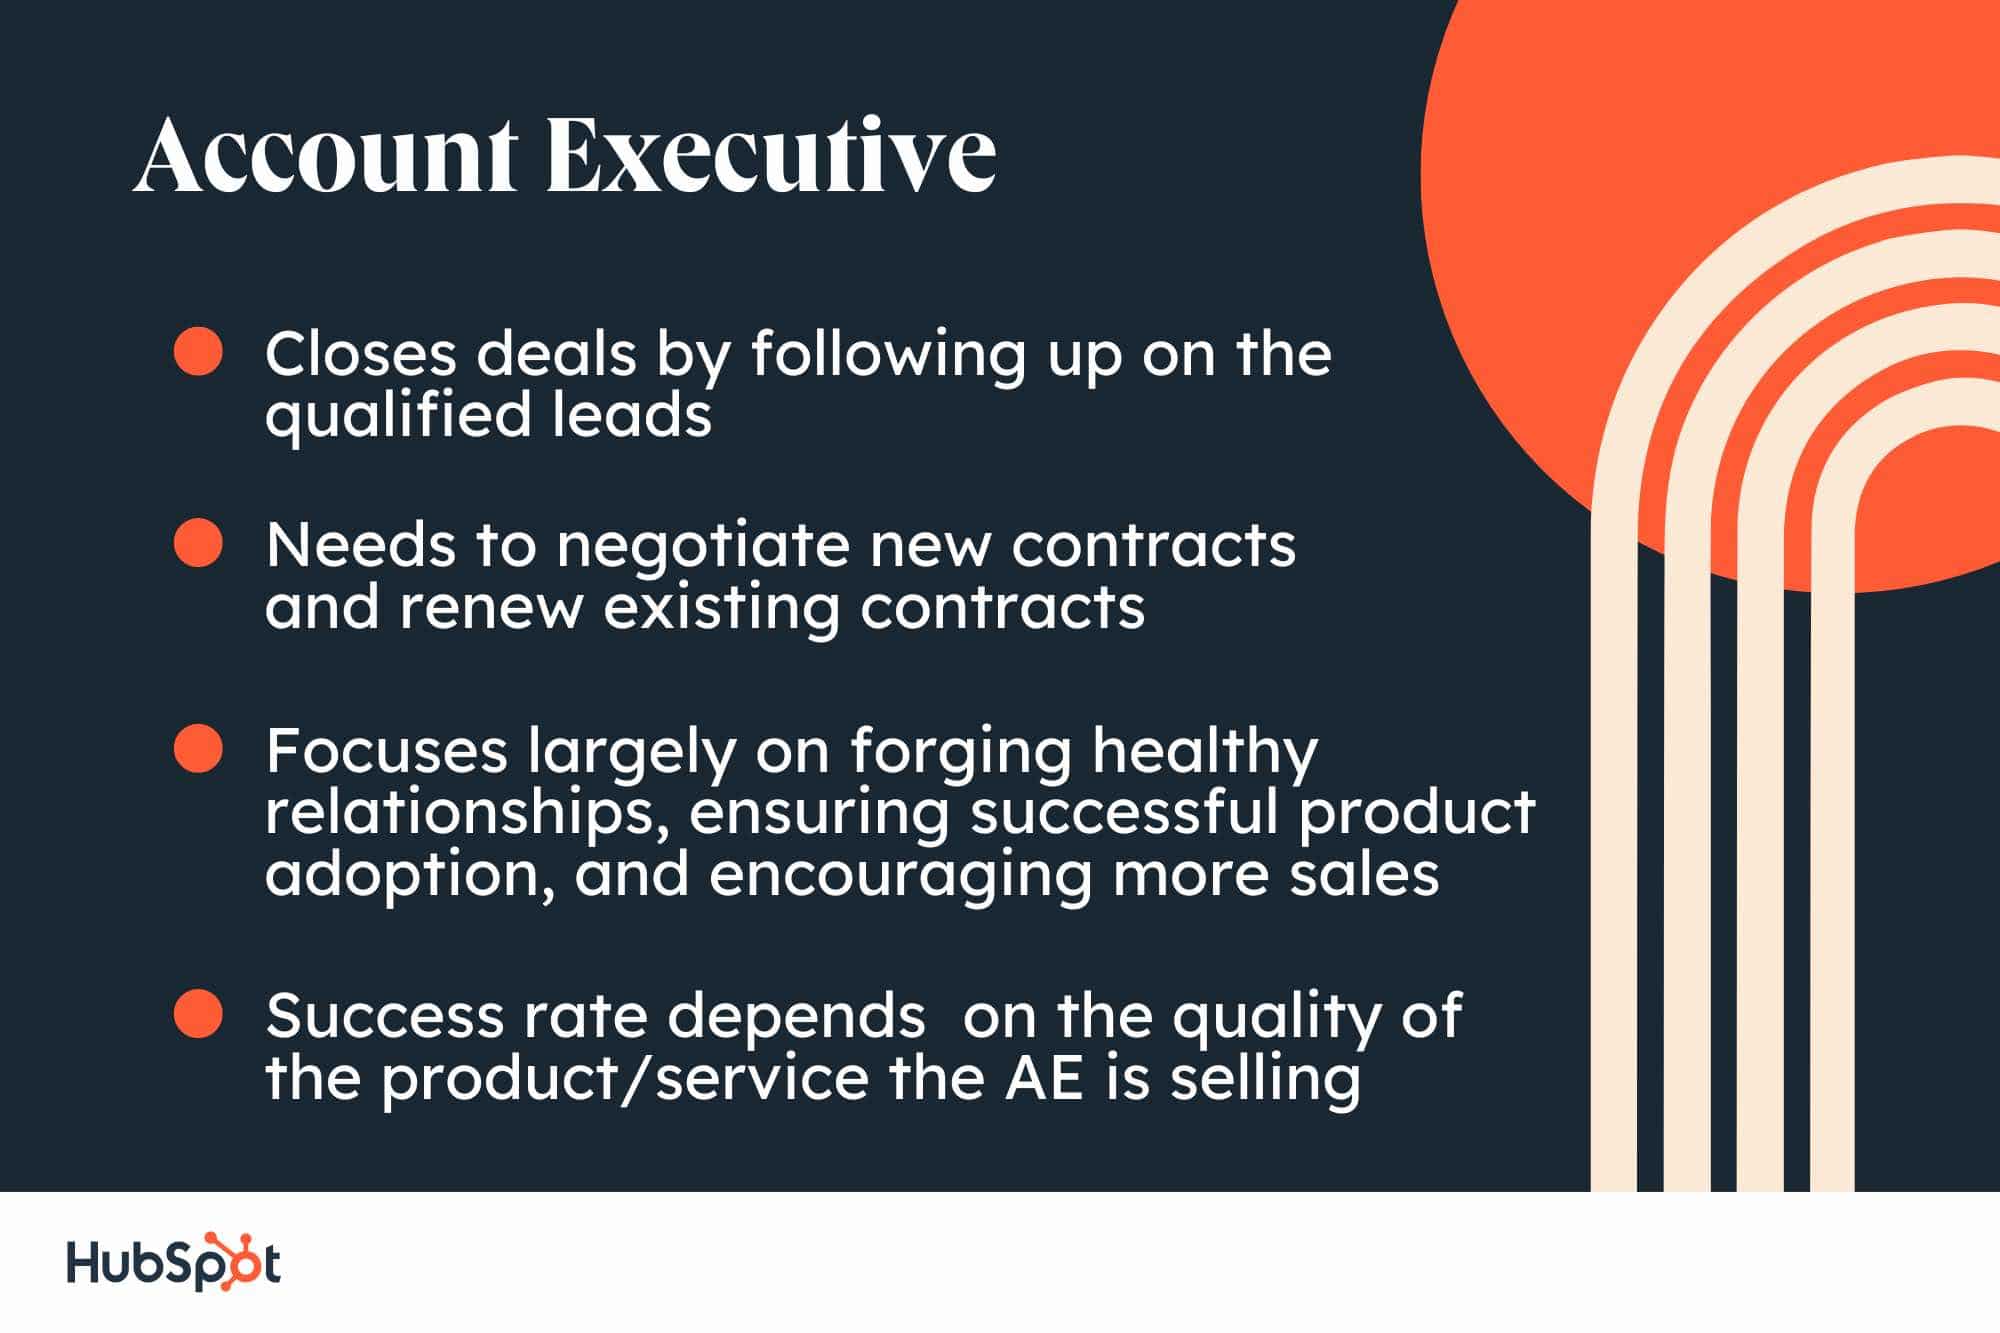 Account Executive. Closes deals by following up on the qualified leads. Needs to negotiate new contracts and renew existing contracts. Focuses largely on forging healthy relationships, ensuring successful product adoption, and encouraging more sales. Success rate depends on the quality of the product/service the AE is selling.